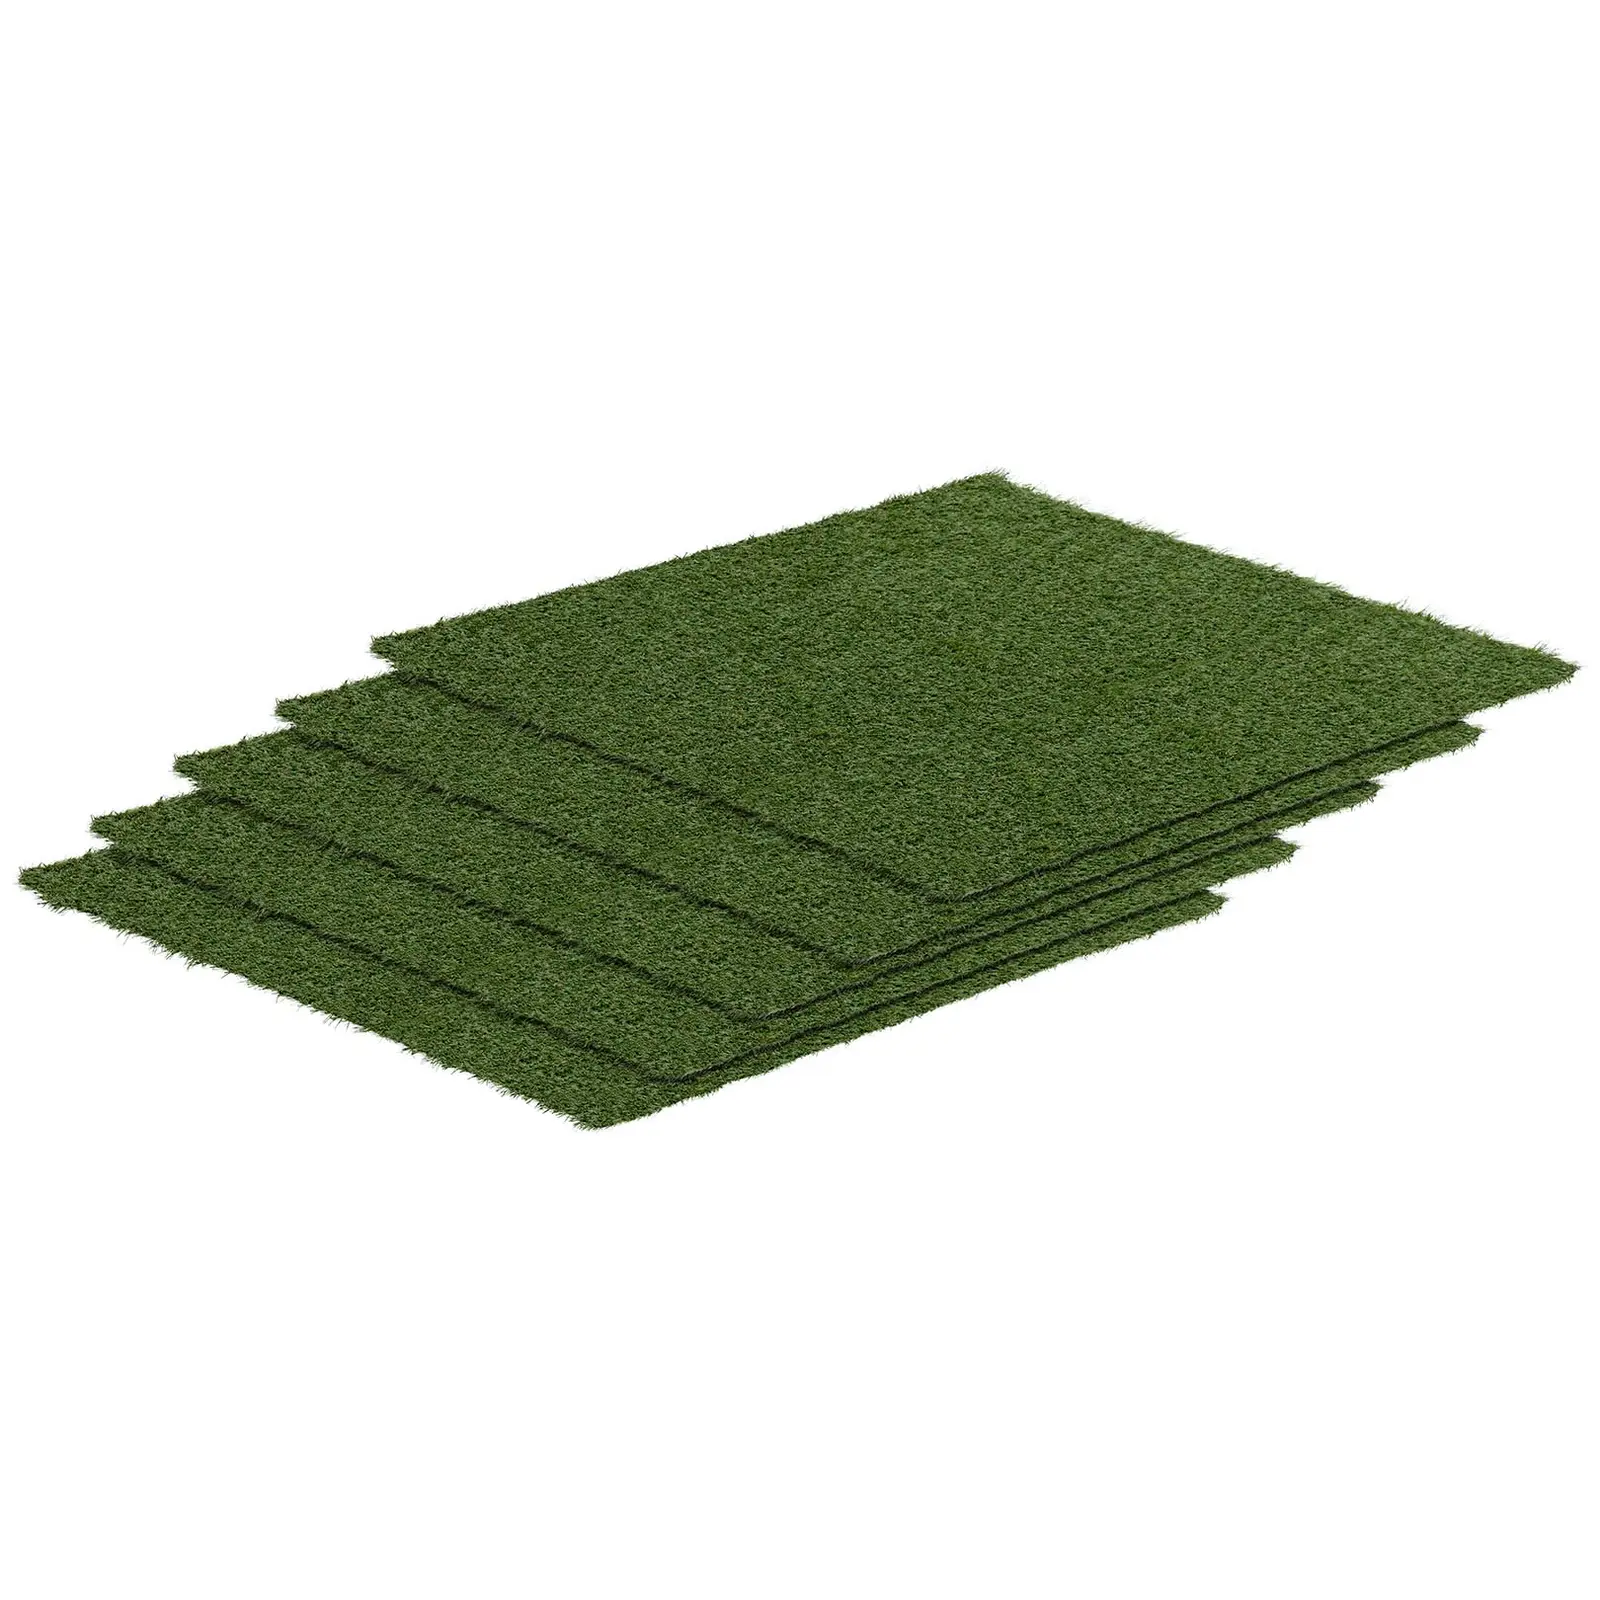 Artificial grass - Set of 5 - 100 x 100 cm - Height: 30 mm - Stitch rate: 14/10 cm - UV-resistant